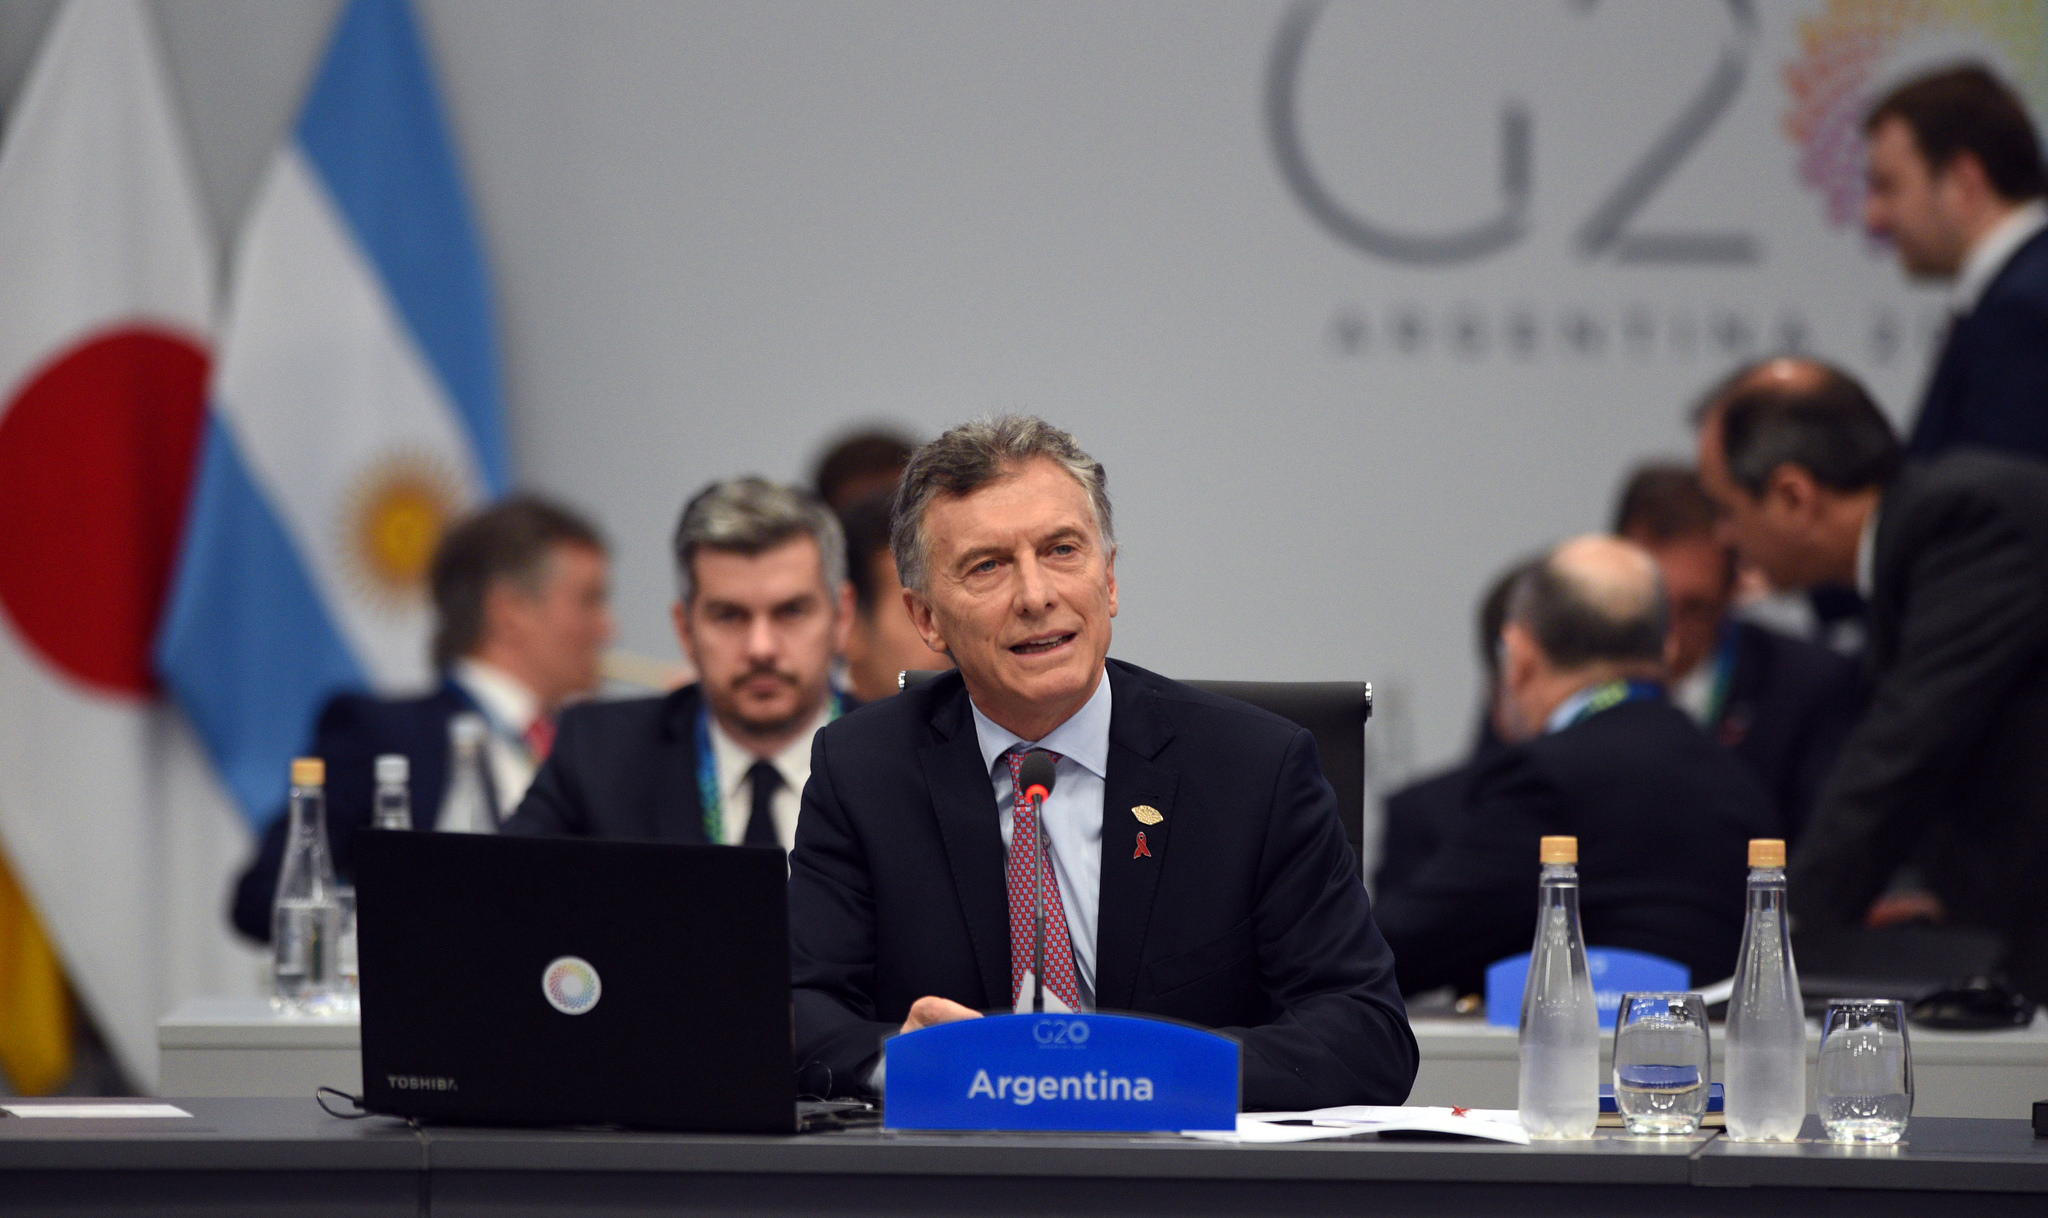 Mauricio Macri, President of Argentina: “Sustainable development is the guiding light for all our economic, social and environmental goals”